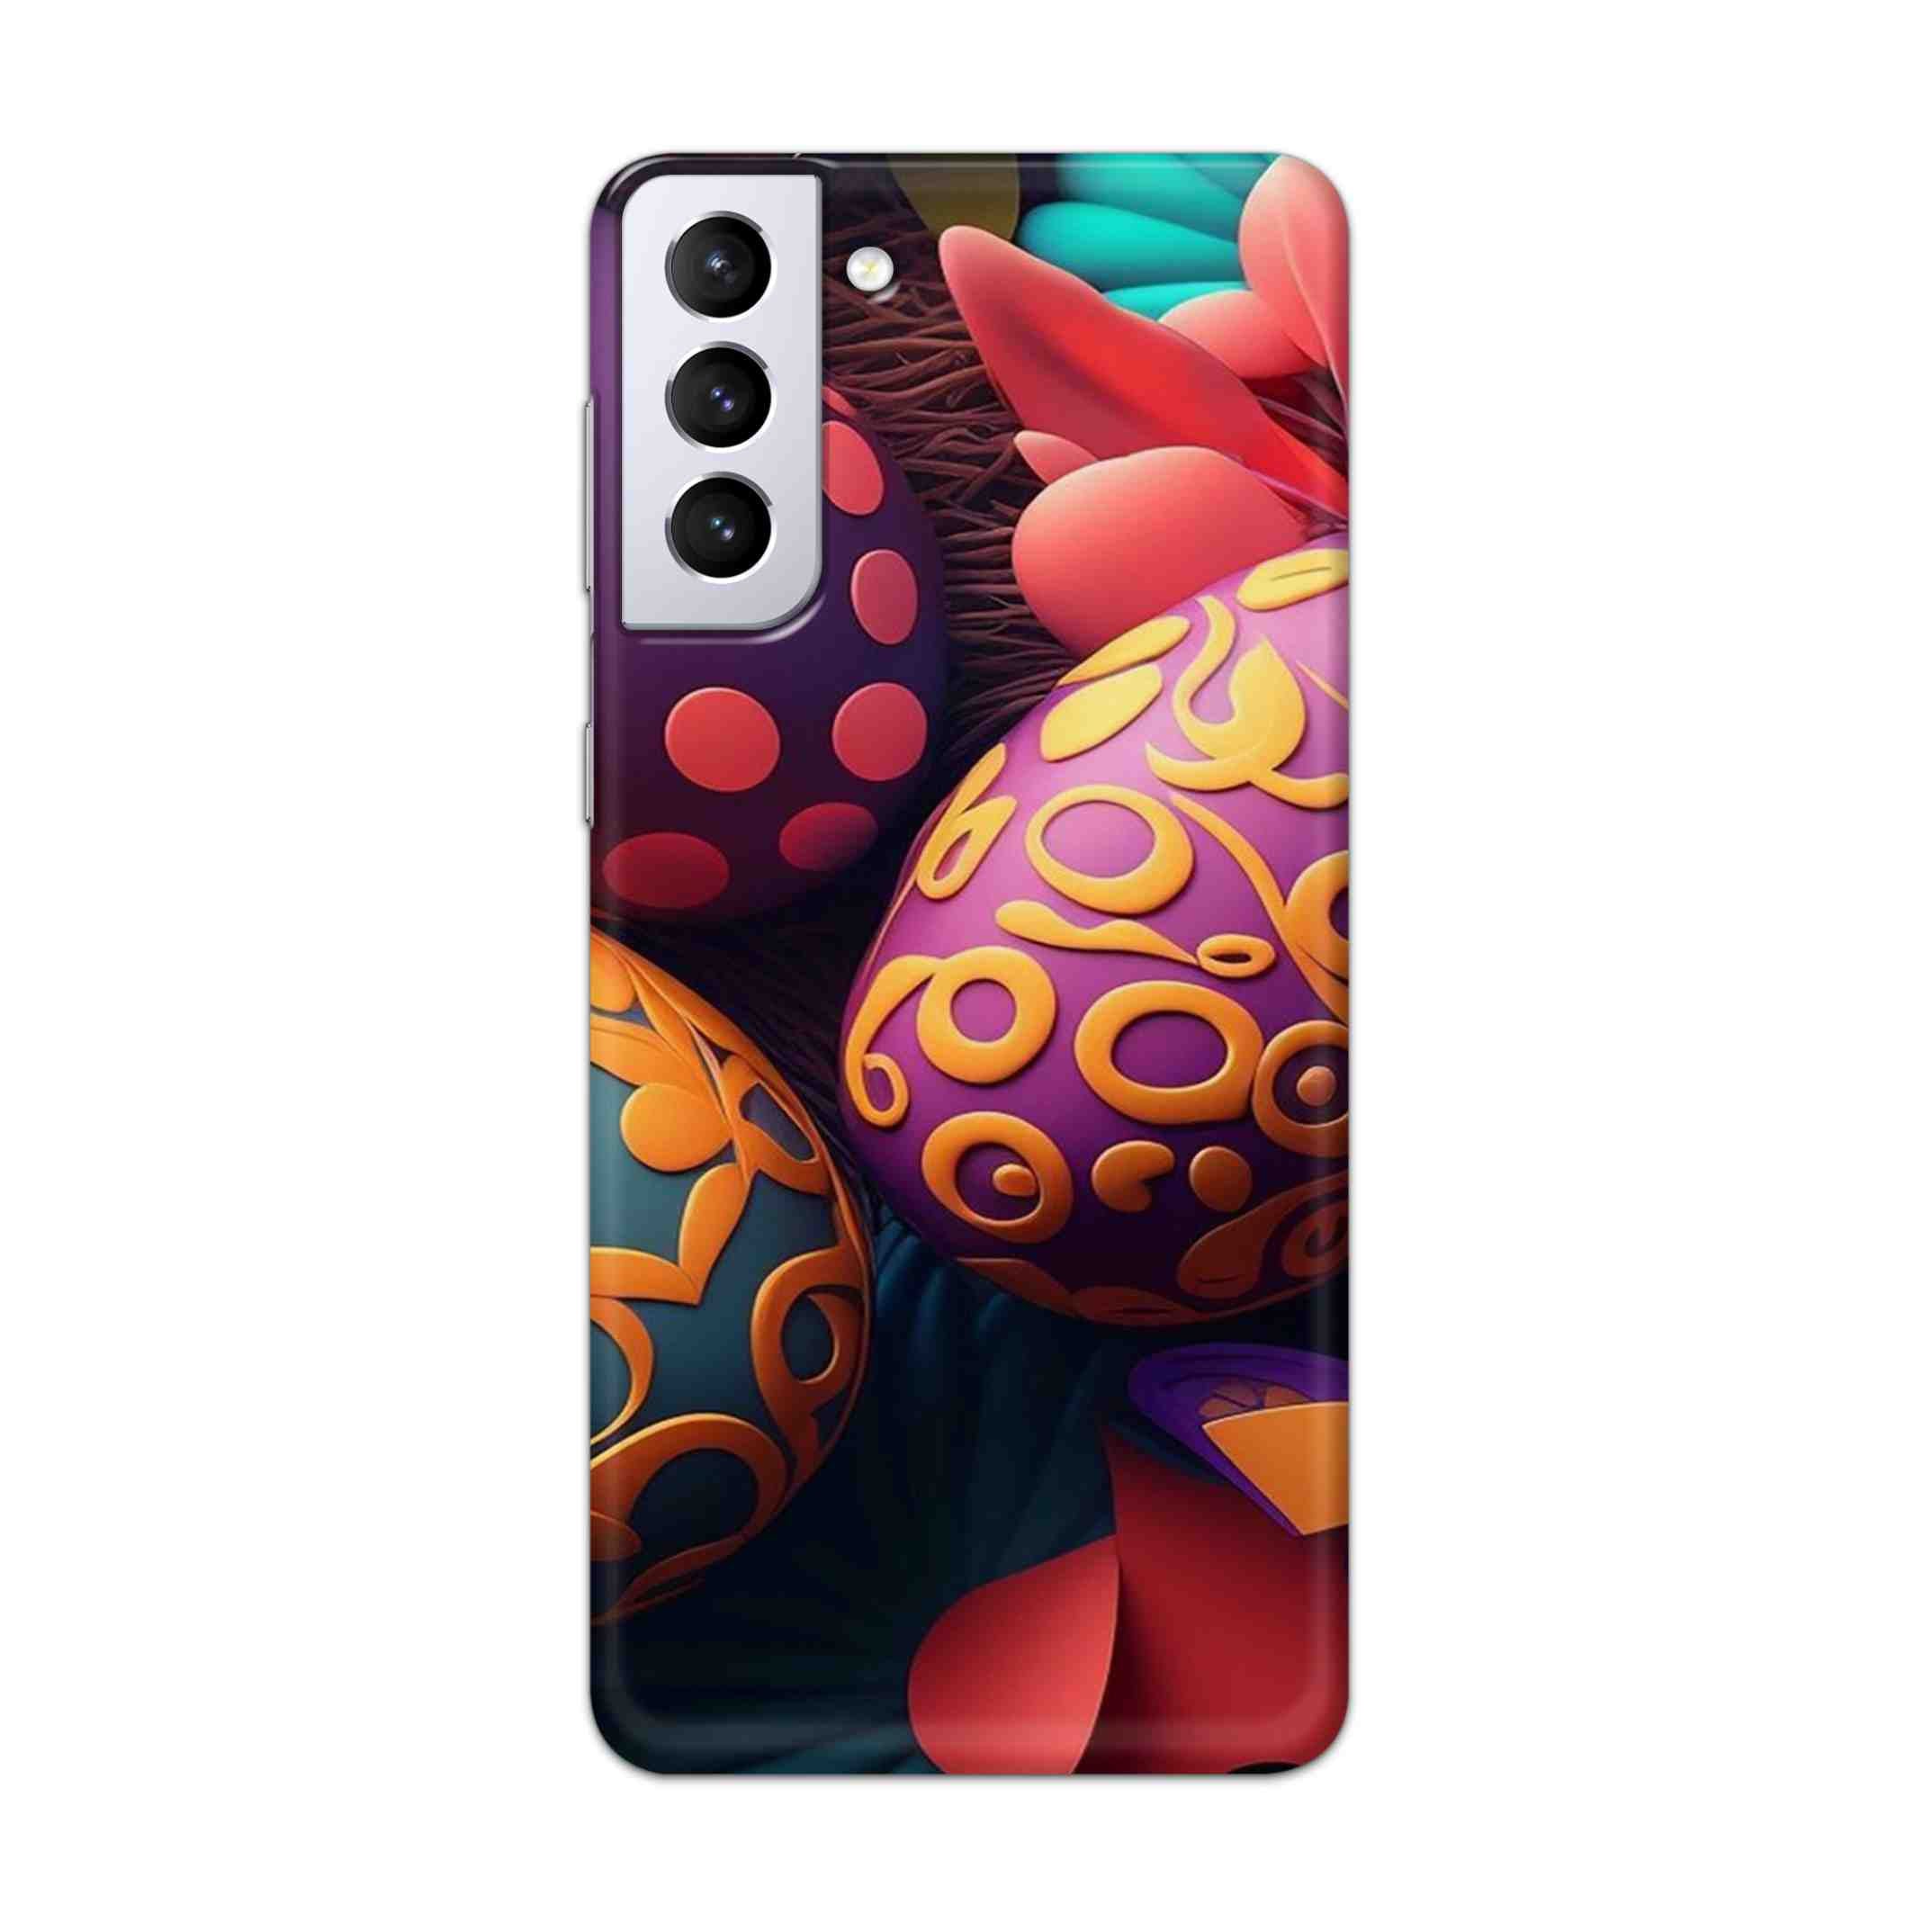 Buy Easter Egg Hard Back Mobile Phone Case Cover For Samsung Galaxy S21 Plus Online